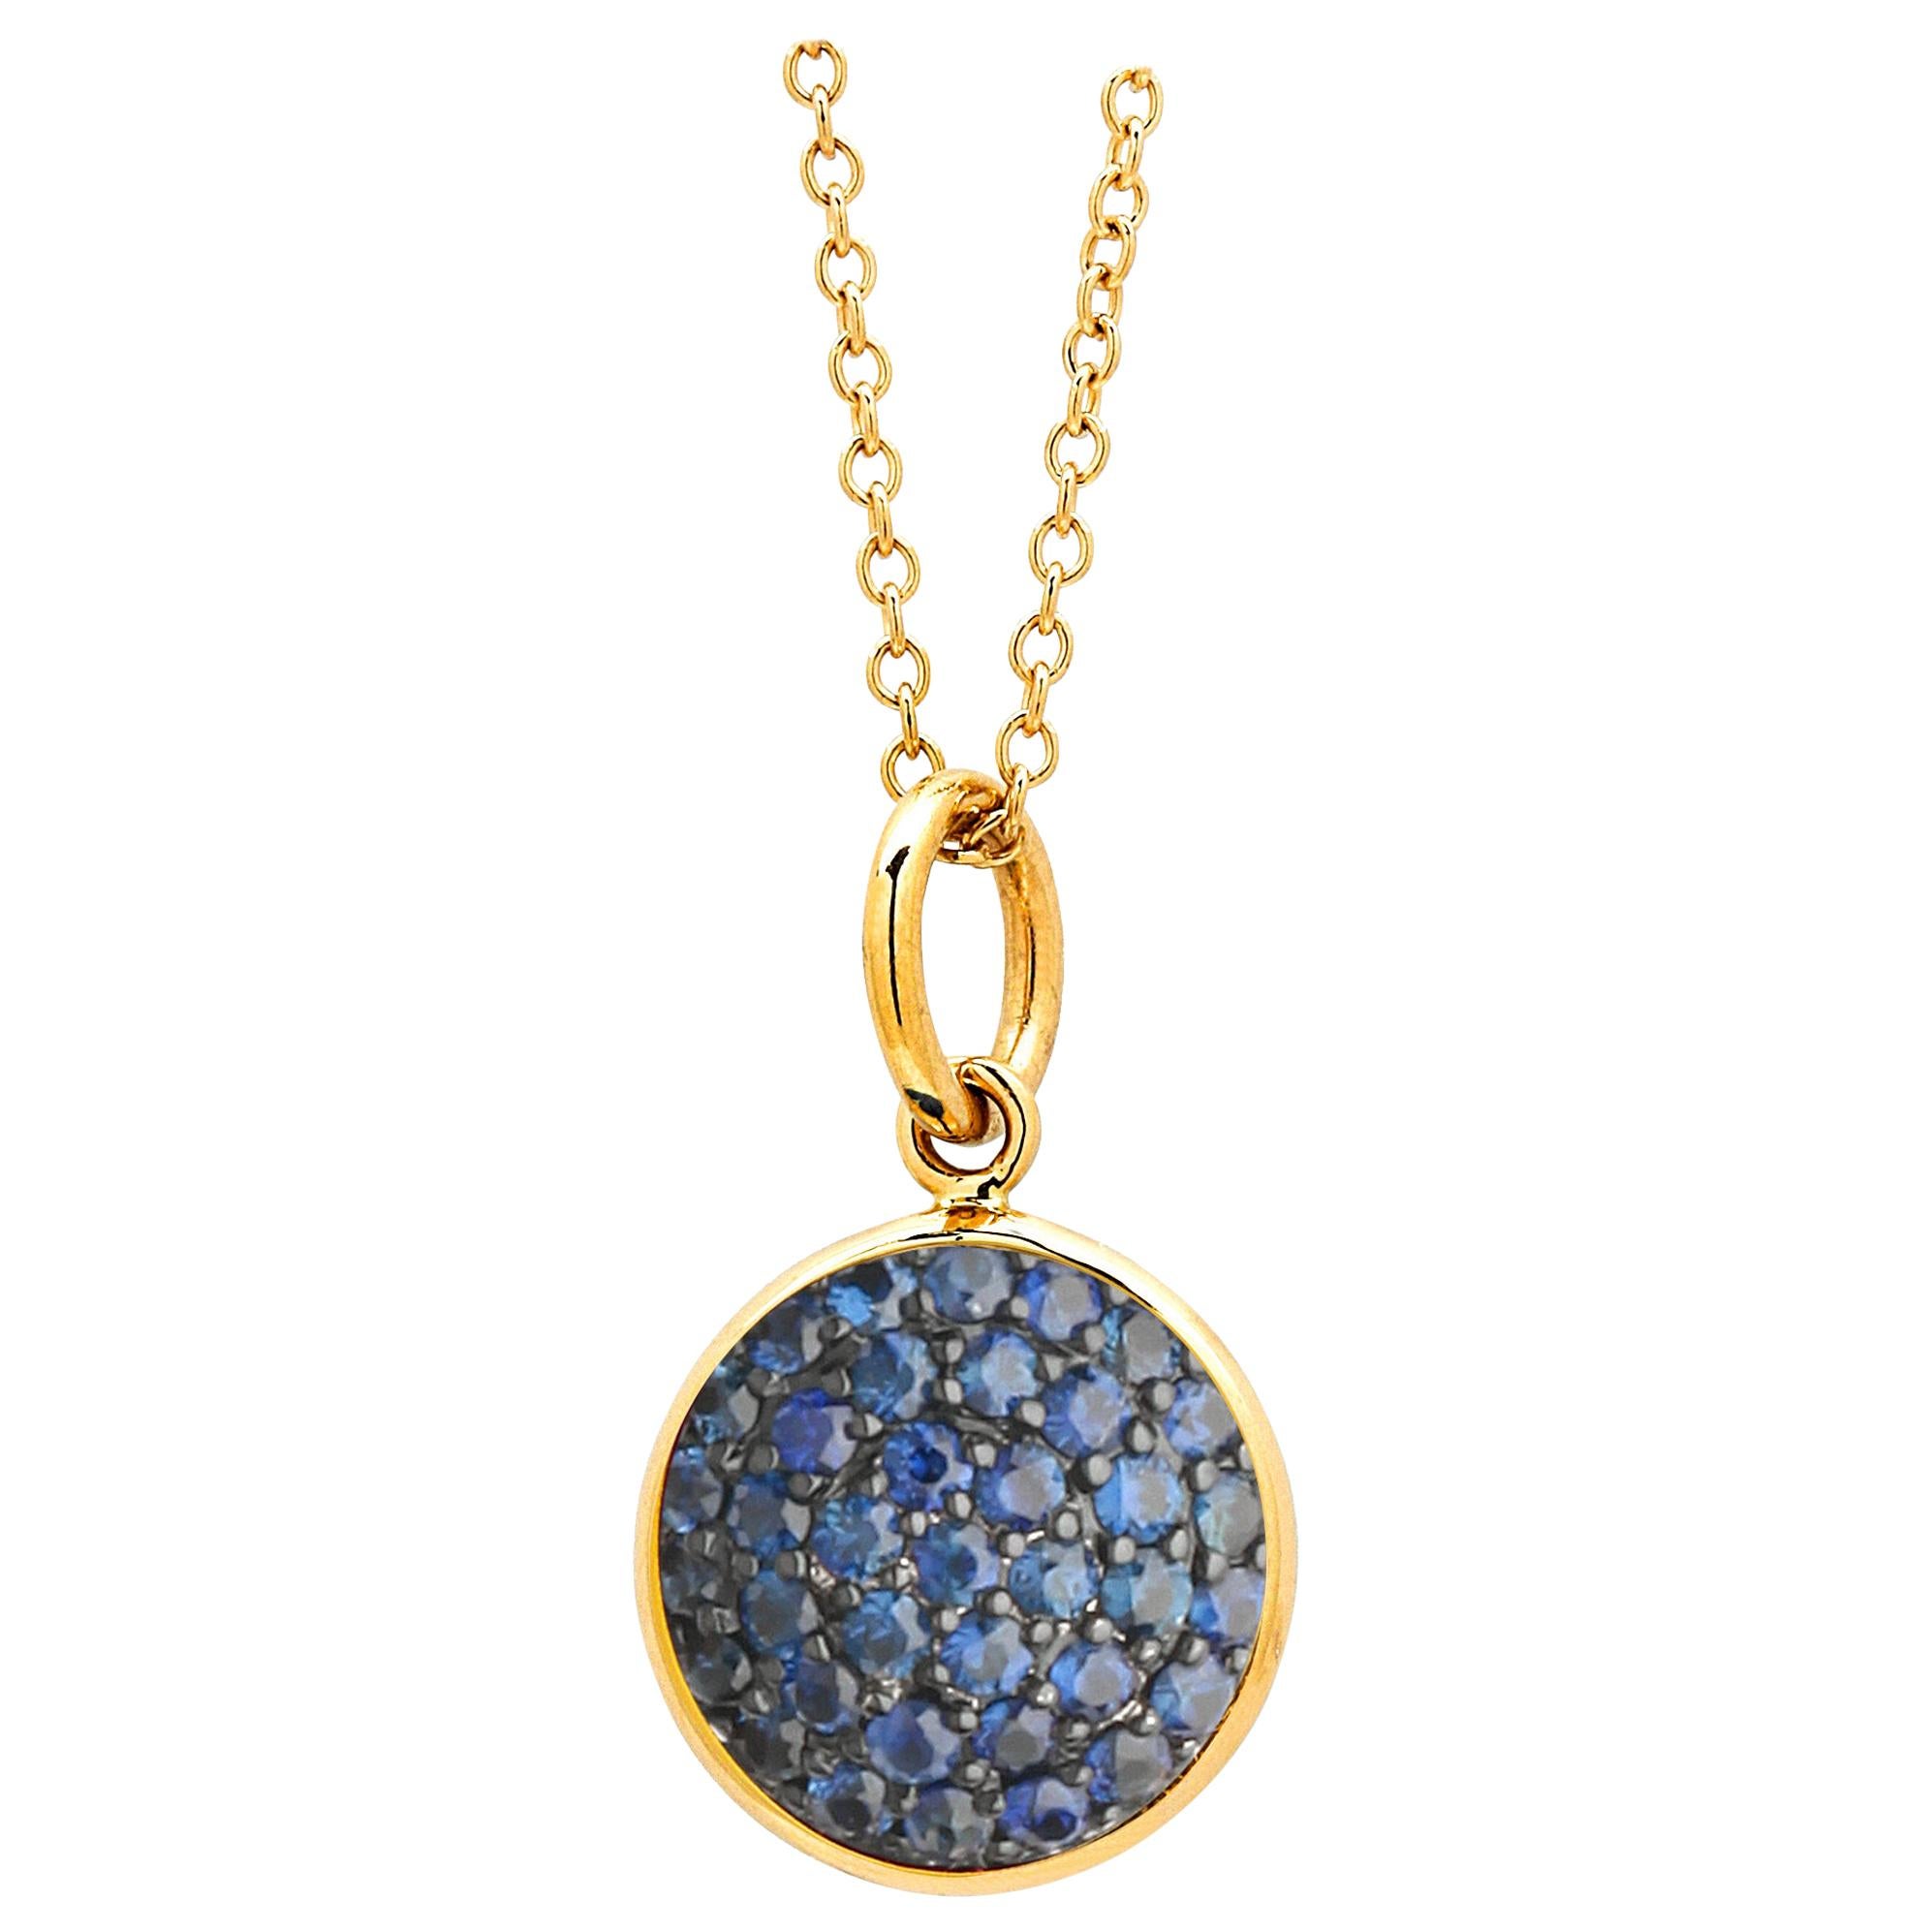 Syna Yellow Gold Charm Pendant with Blue Sapphires